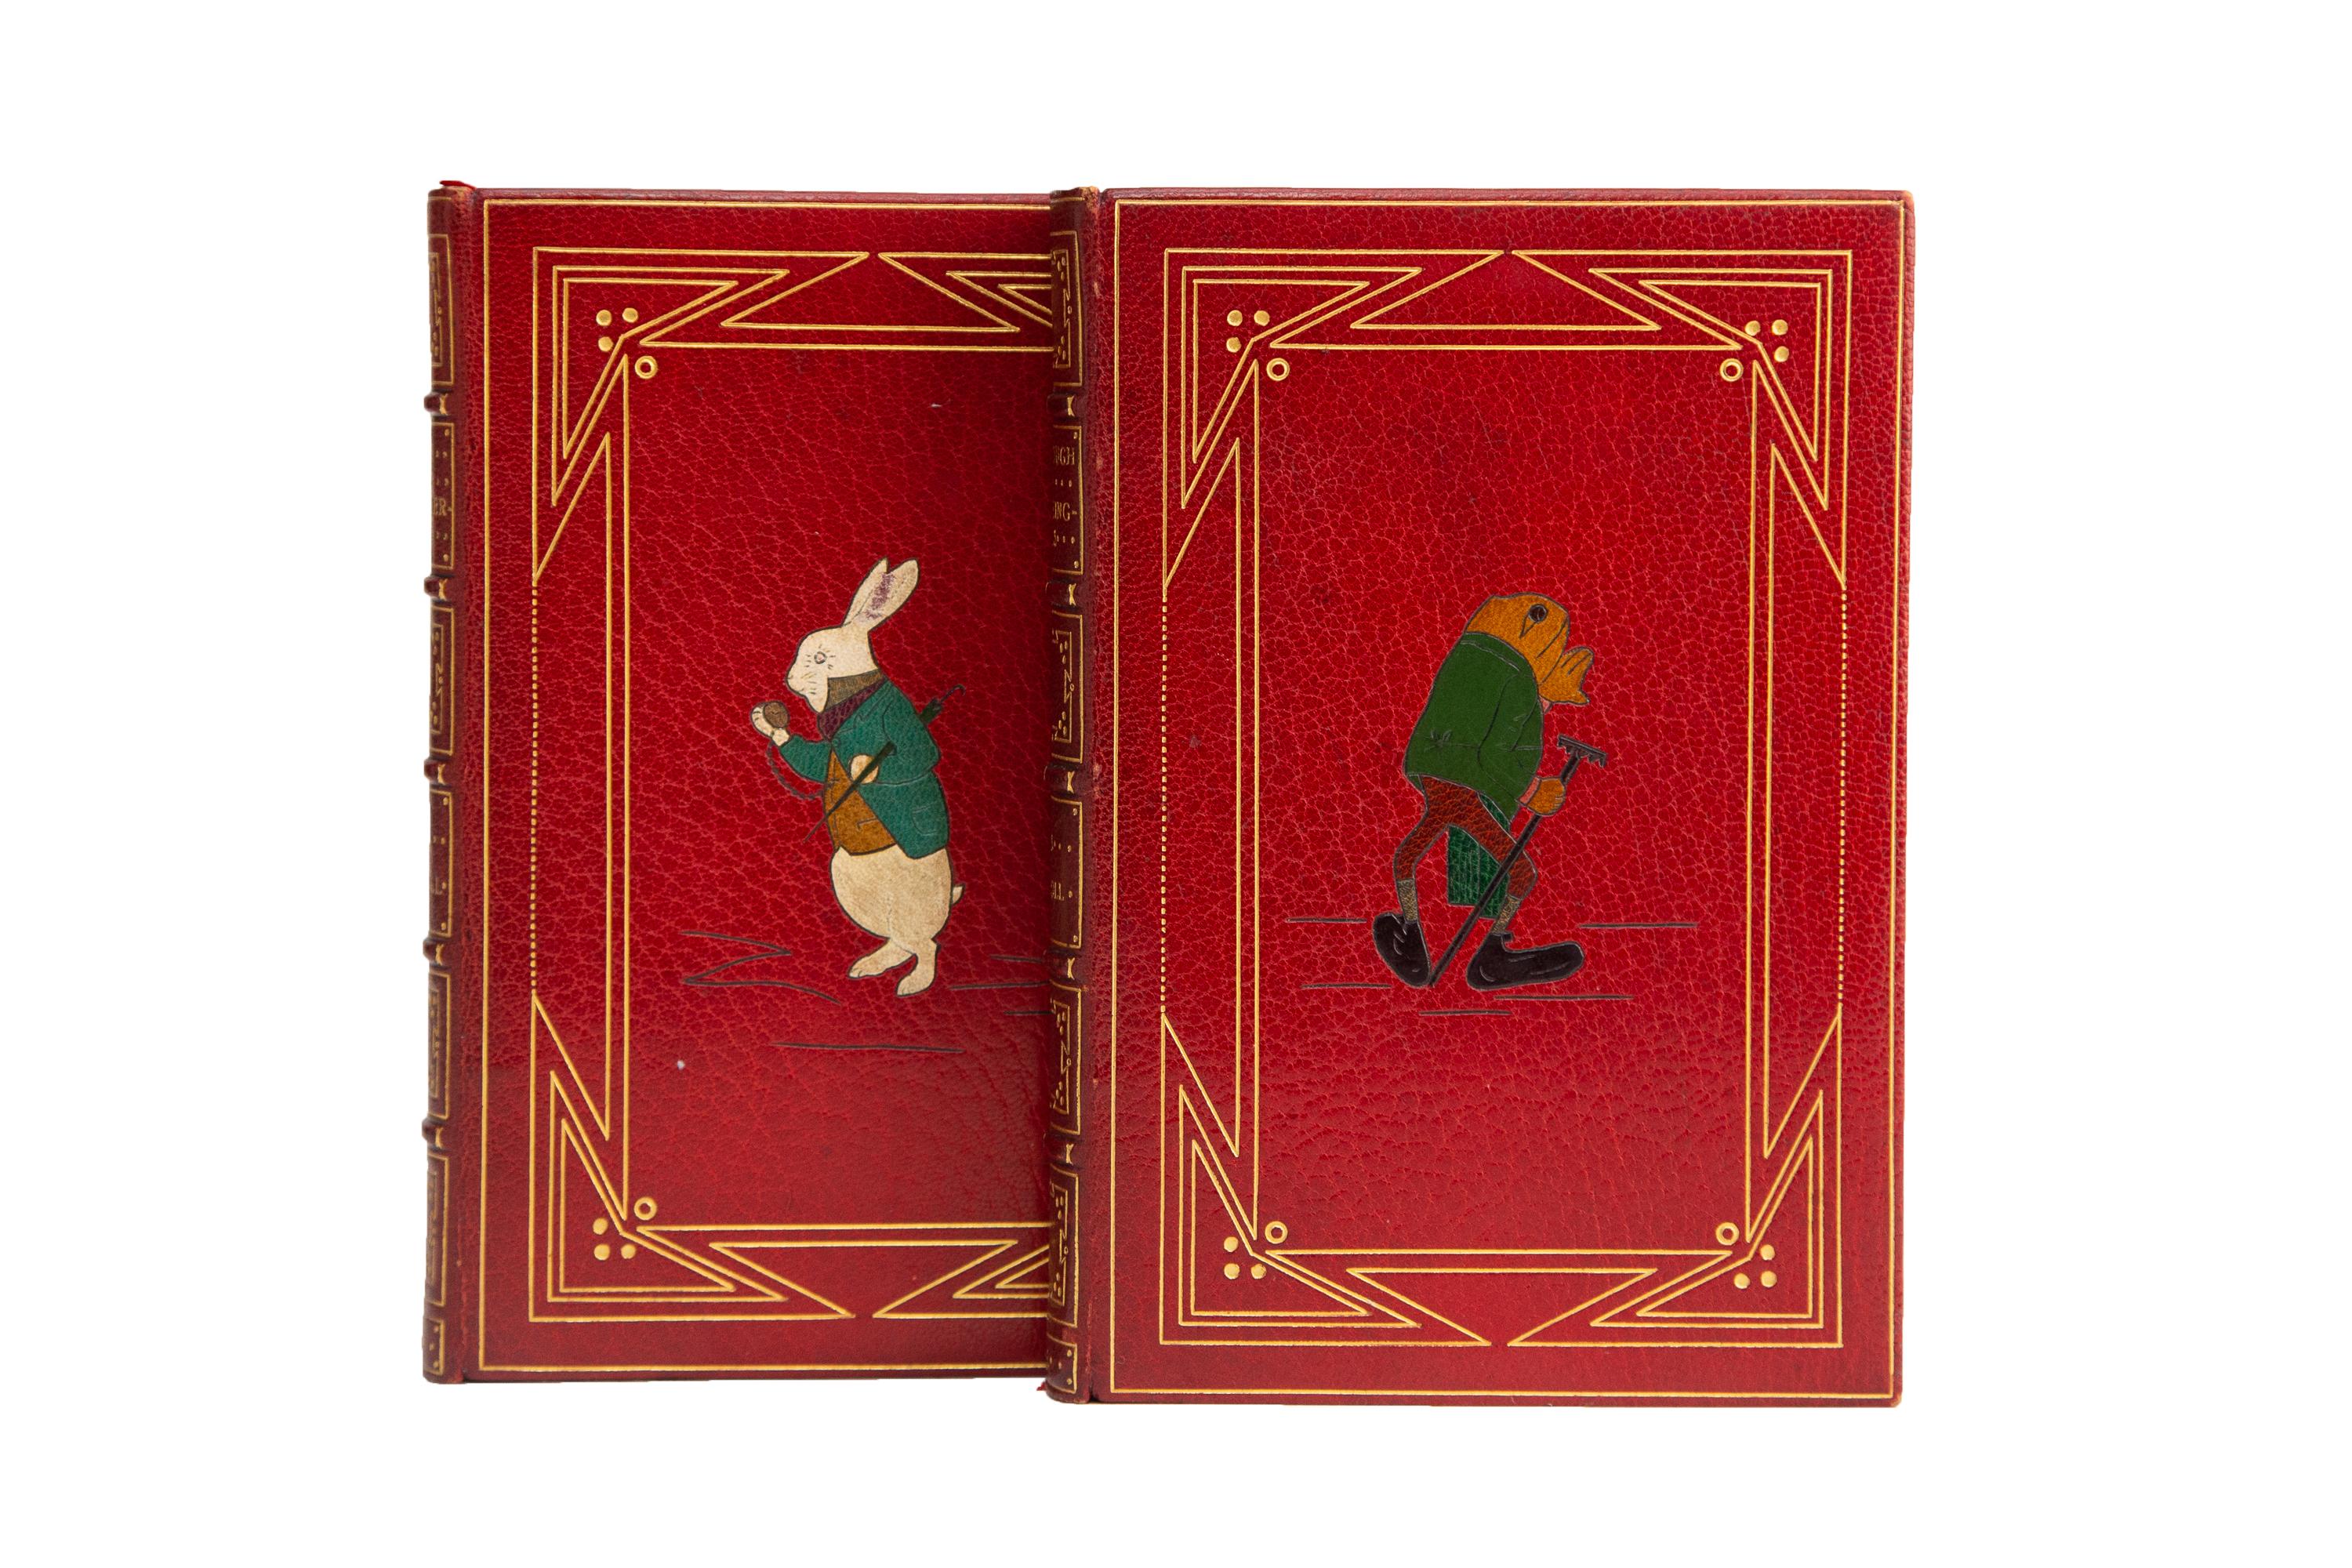 2 Volumes. Lewis Carroll, Alice's Adventures in Wonderland & Through the Looking Glass. Early Edition. Bound by Bayntun in full red morocco with inlaid multi-color figures of the White Rabbit and the Frog as well as geometric gilt framing in the